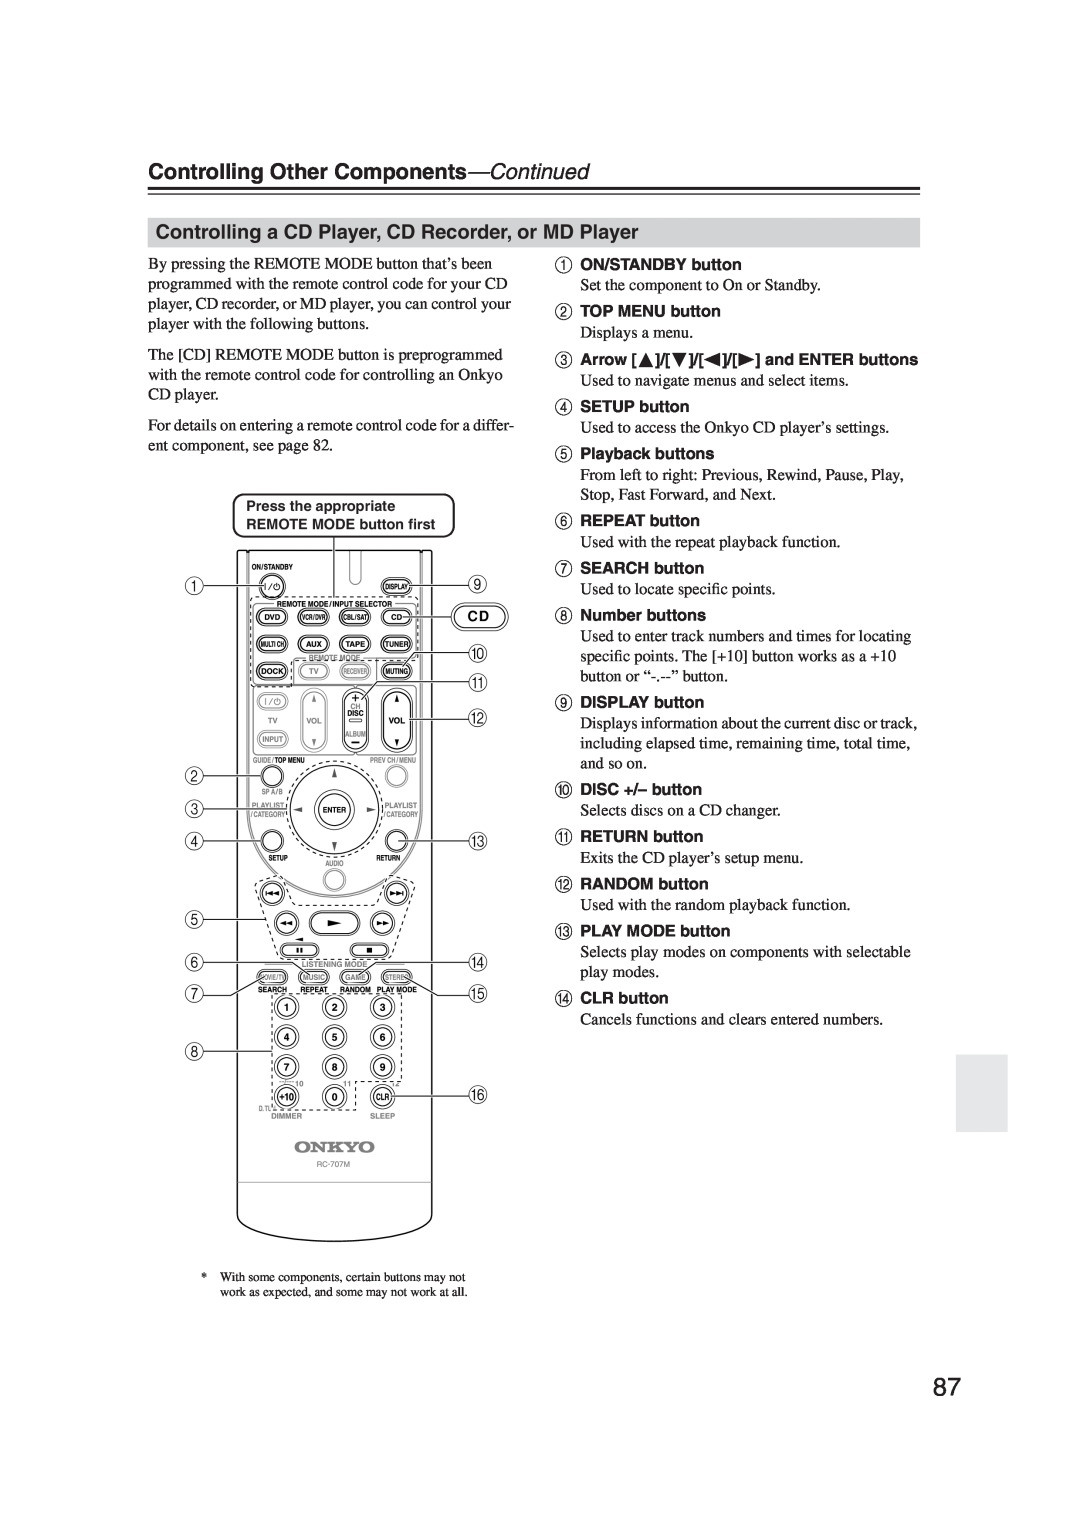 Onkyo S5100 instruction manual Controlling Other Components—Continued, J K L 